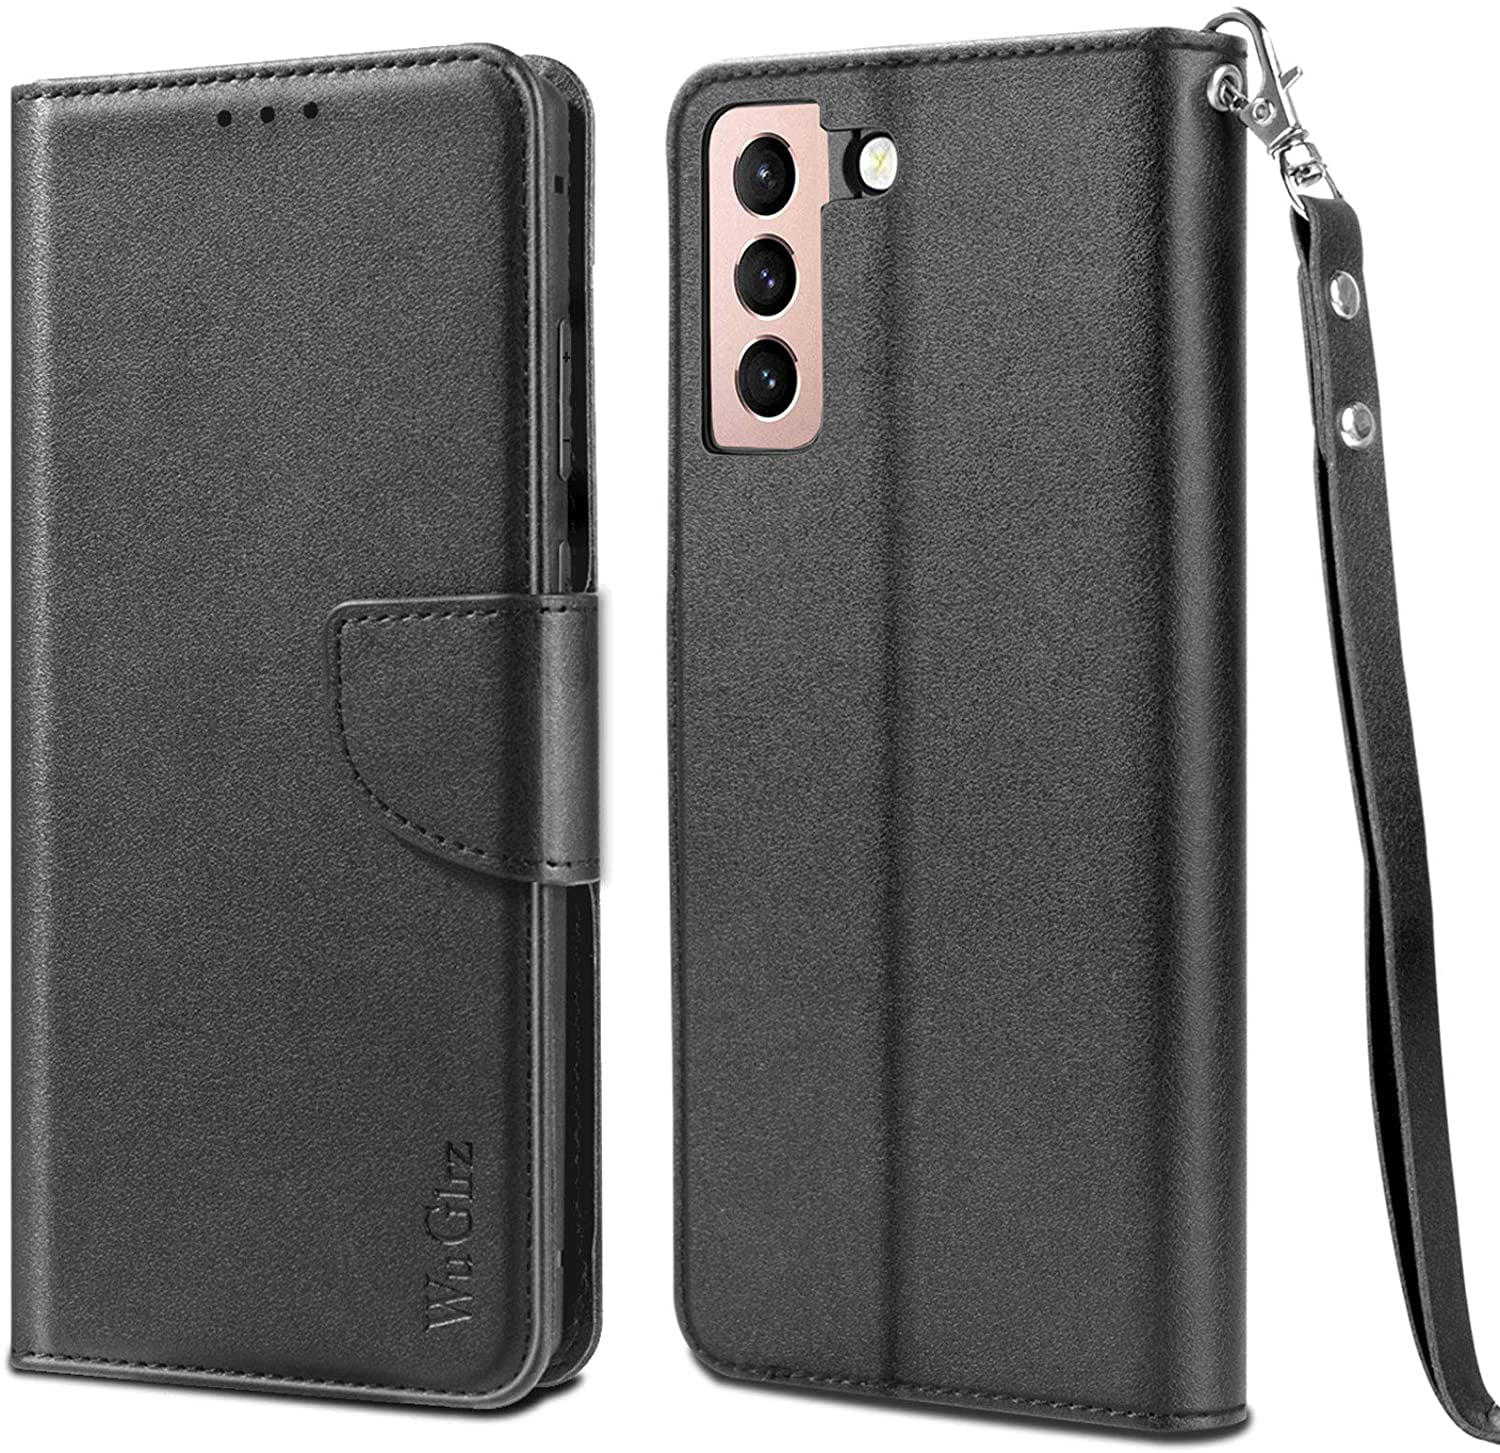 Kickstand Feature Fyy Samsung Galaxy A32 5G Case, Premium PU Leather Flip Wallet Phone Case Protective Cover with Card Holder for Samsung Galaxy A32 5G 6.5 2021 Black